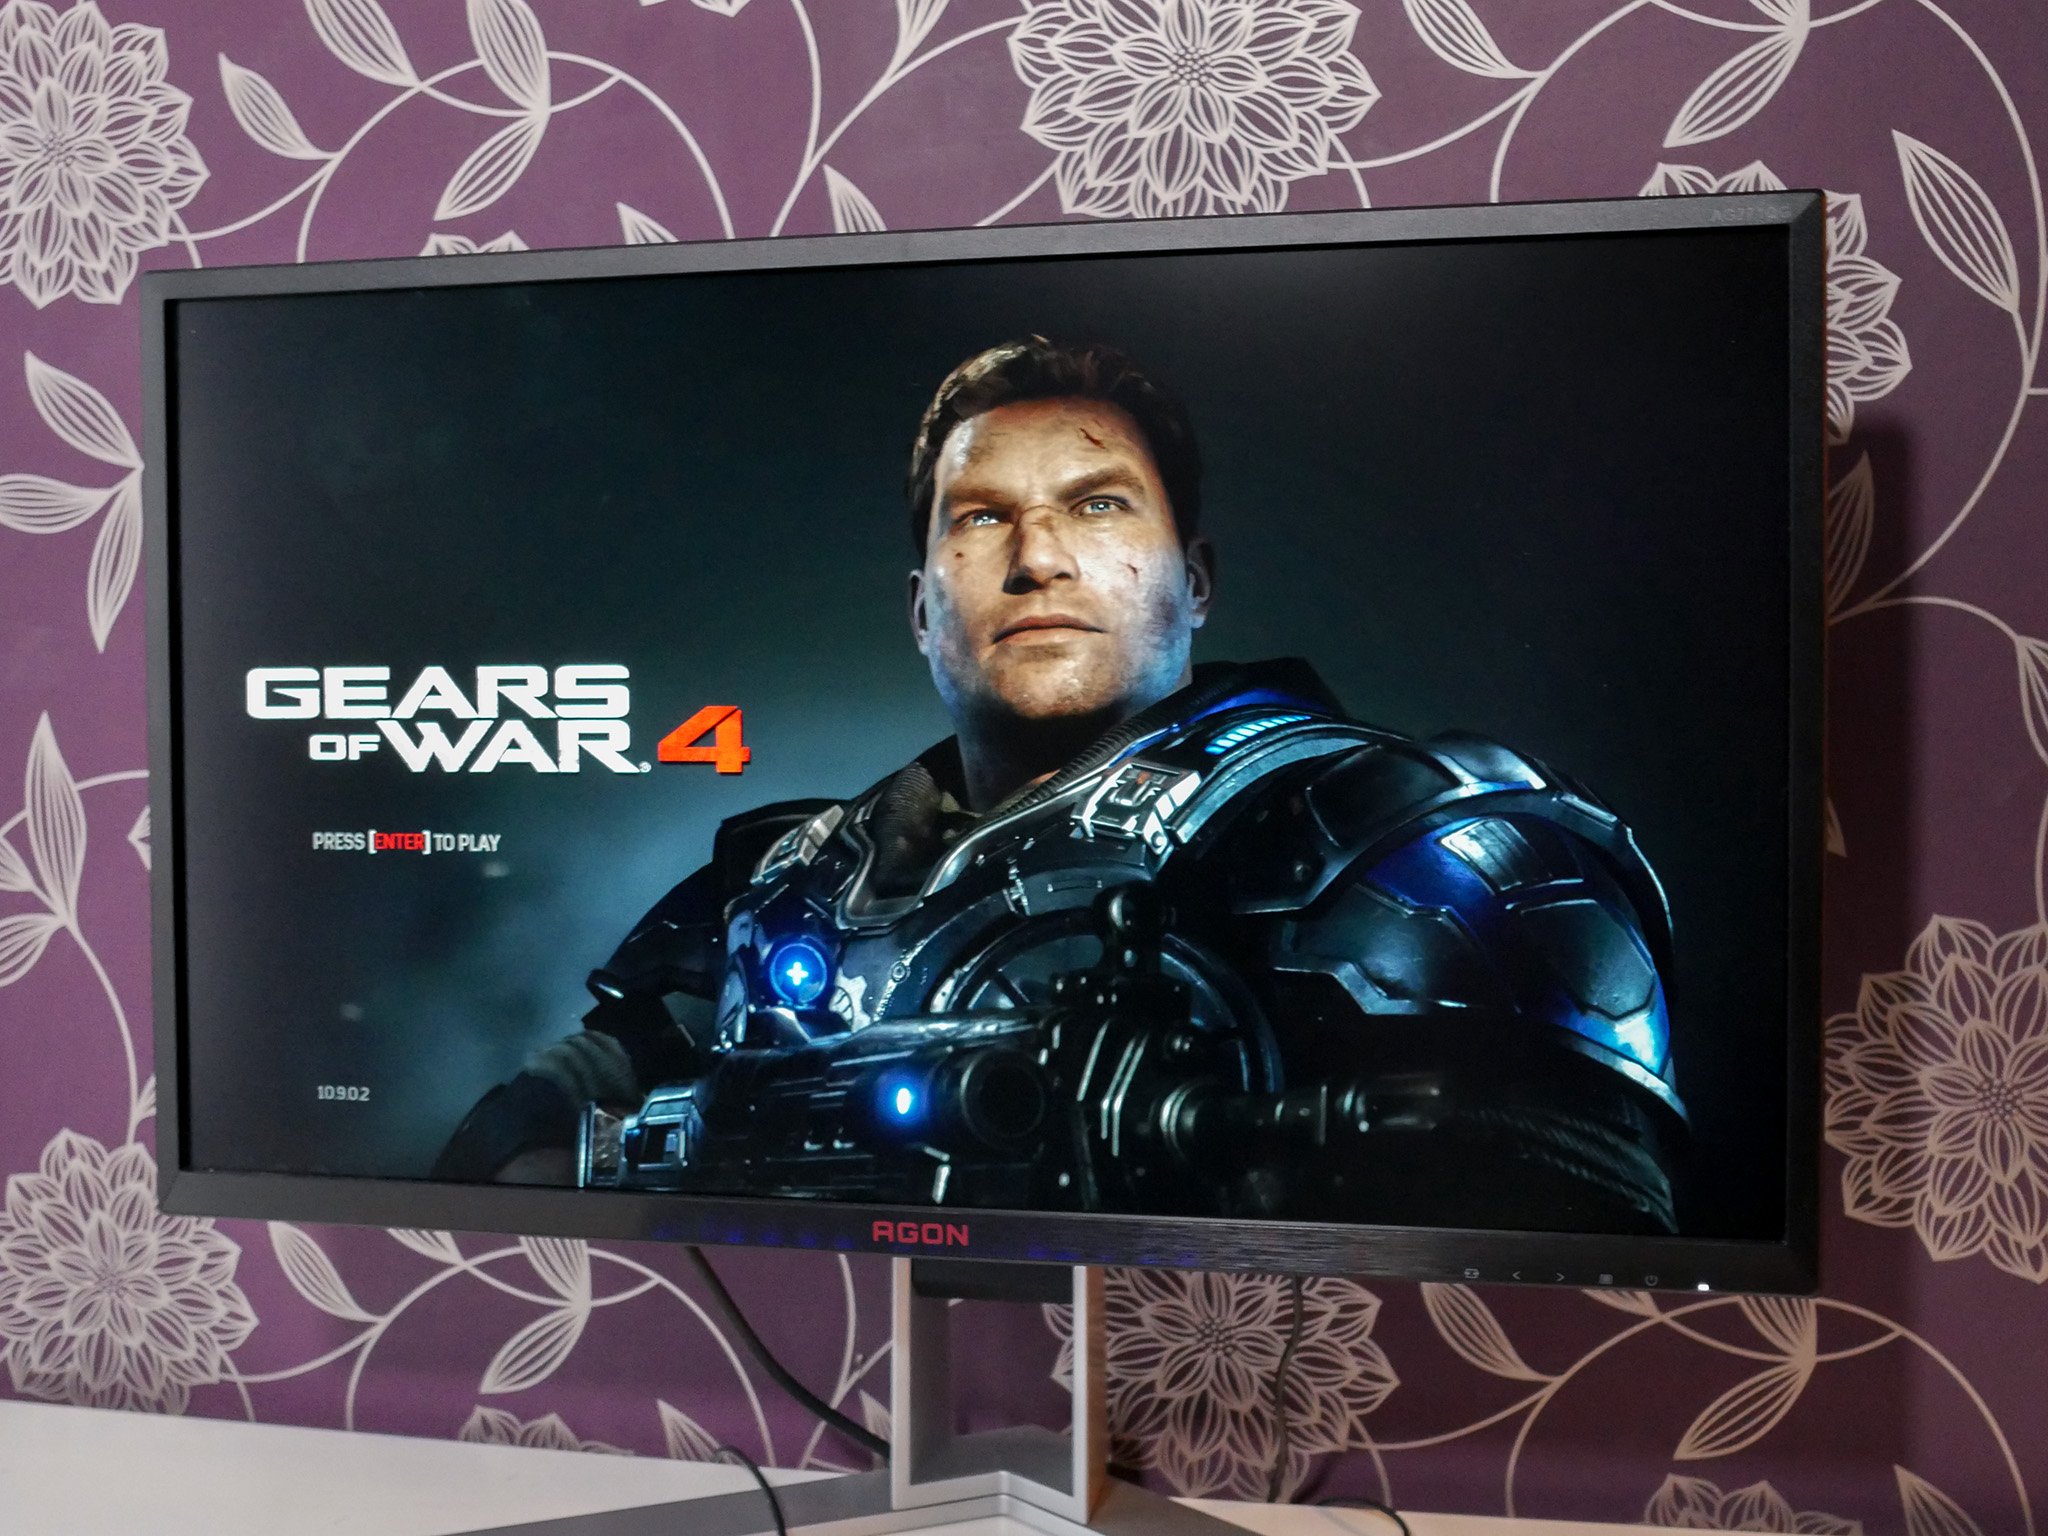 1080p vs 1440p: What's the best value gaming monitor resolution in 2023?